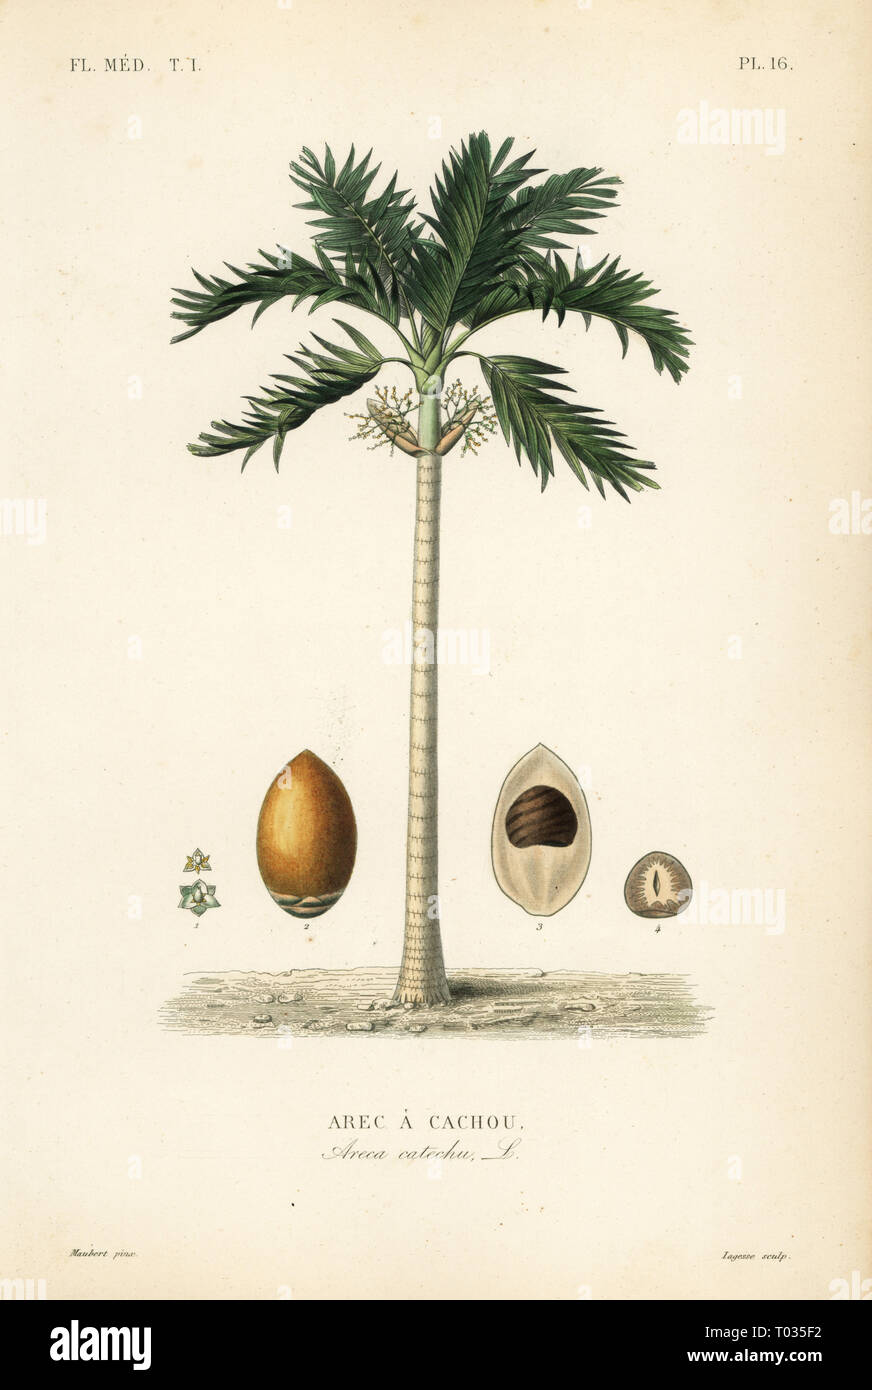 Areca nut palm tree, Areca catechu, Arec a cachou. Handcoloured steel engraving by Lagesse after a botanical illustration by Edouard Maubert from Pierre Oscar Reveil, A. Dupuis, Fr. Gerard and Francois Herincq’s La Regne Vegetal: Flore Medicale, L. Guerin, Paris, 1864-1871. Stock Photo